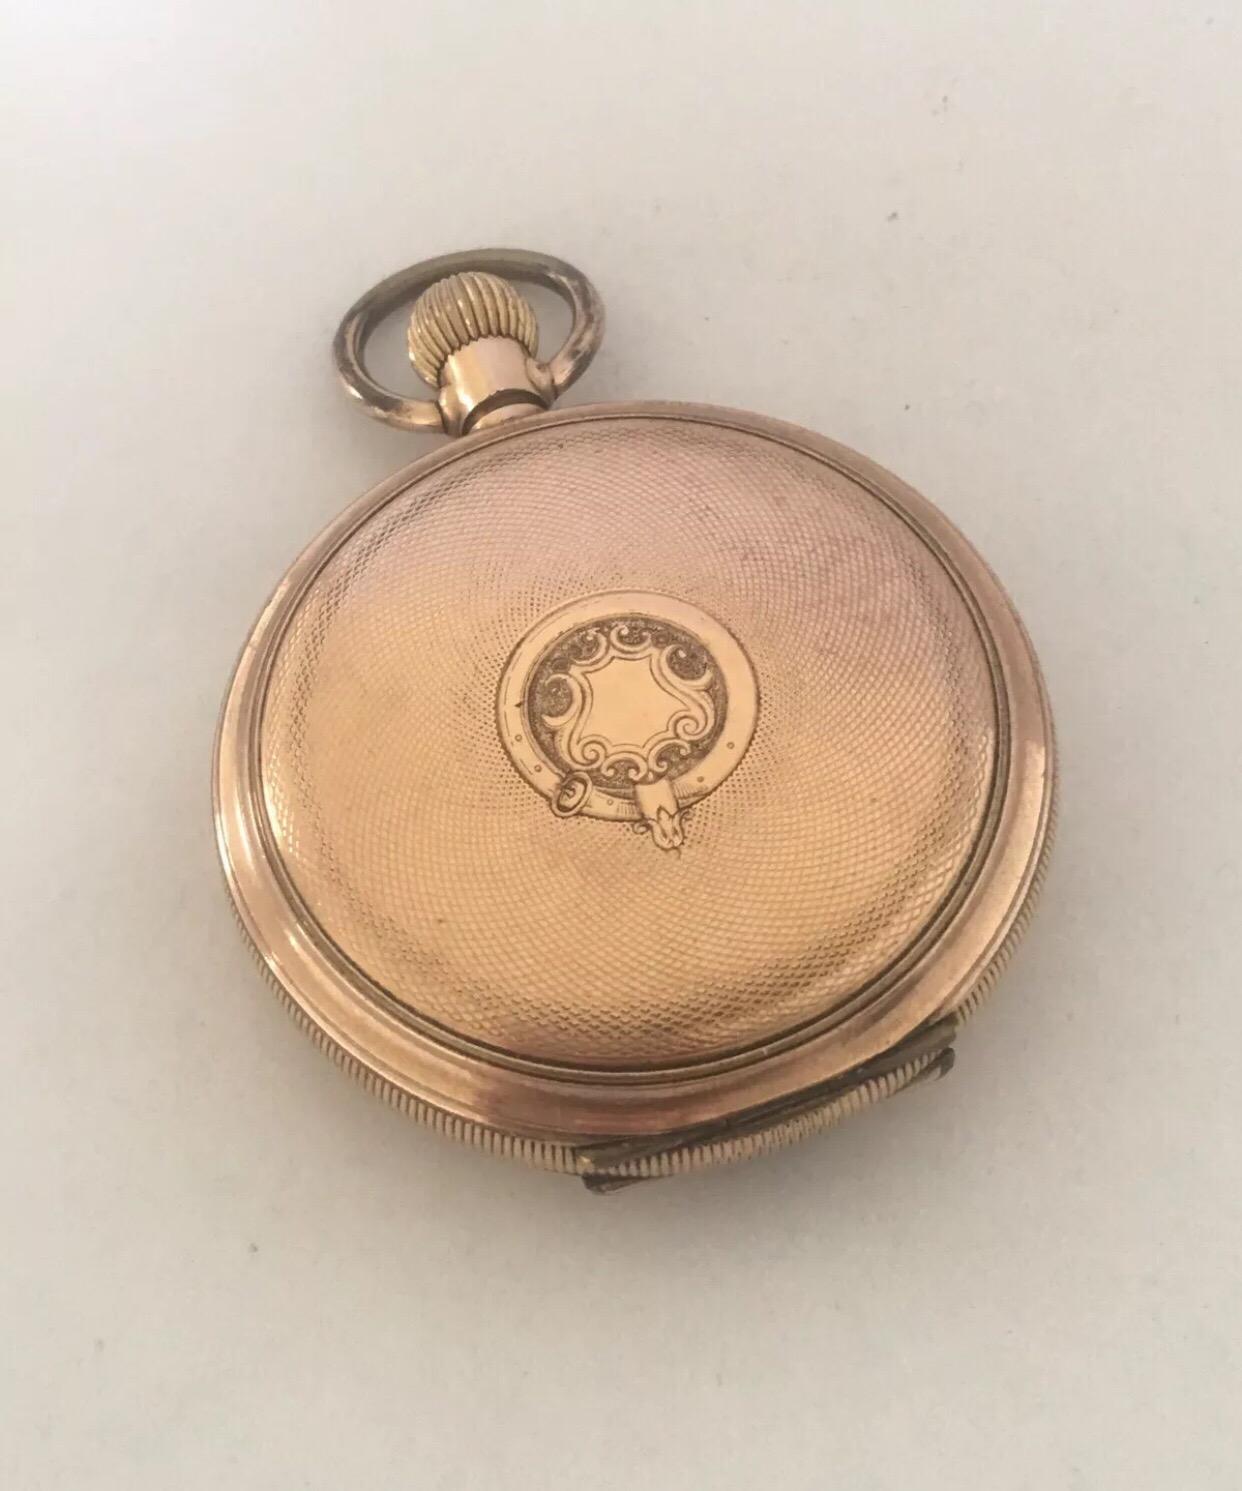 
Antique Gold Filled Full Hunter Hebdomas 8 days Swiss made Pocket Watch.

This watch is in good working condition. Visible crack on the enamel dial as shown on the photos.